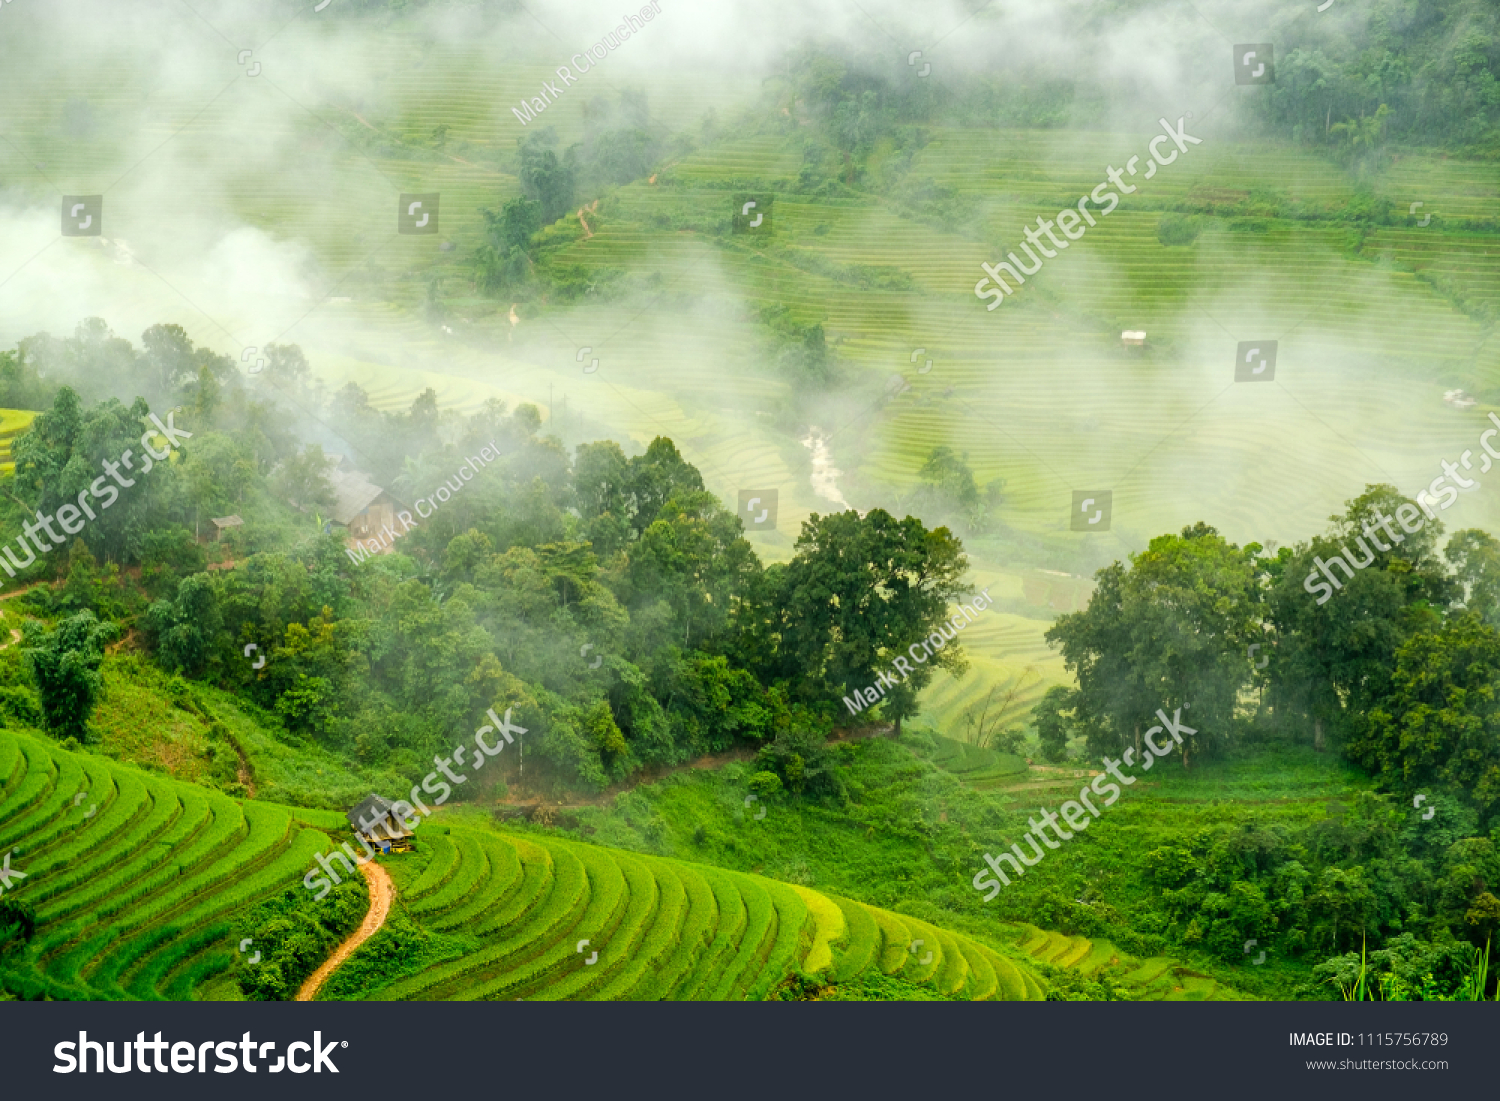 Lush rice paddy terraces of the misty mountains in Sapa, Lao Cai Province, north west Vietnam. #1115756789